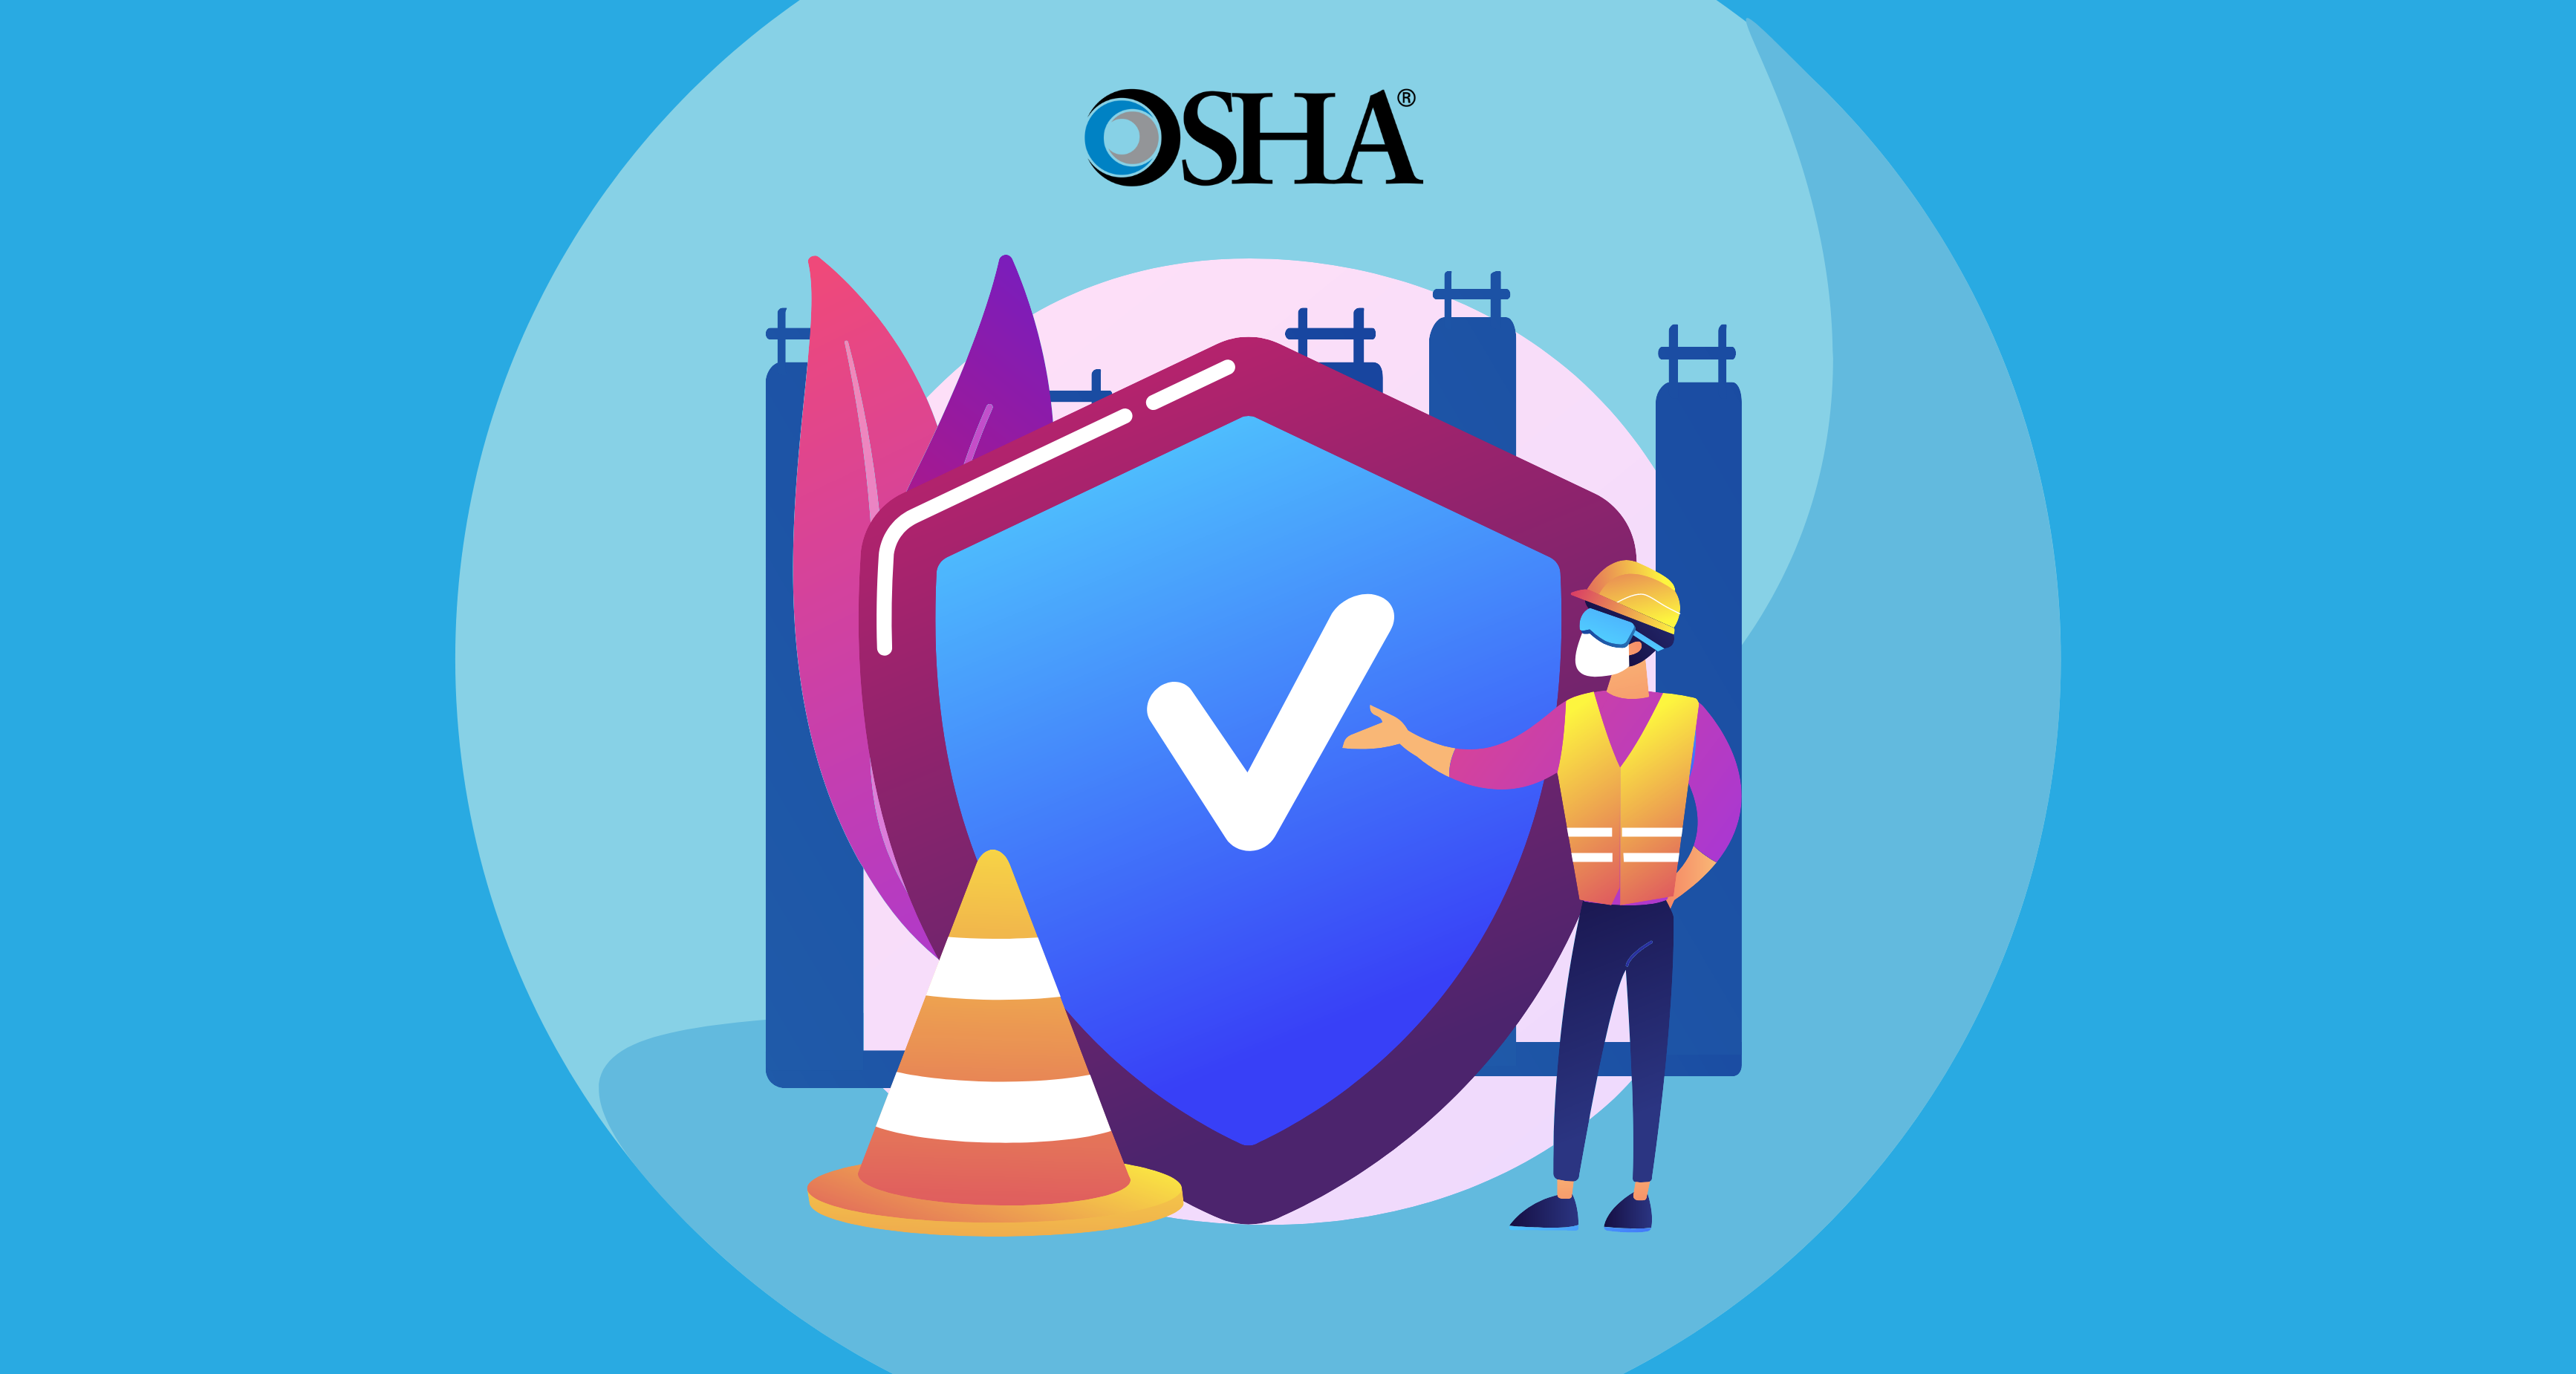 What is OSHA's role in protecting healthcare workers